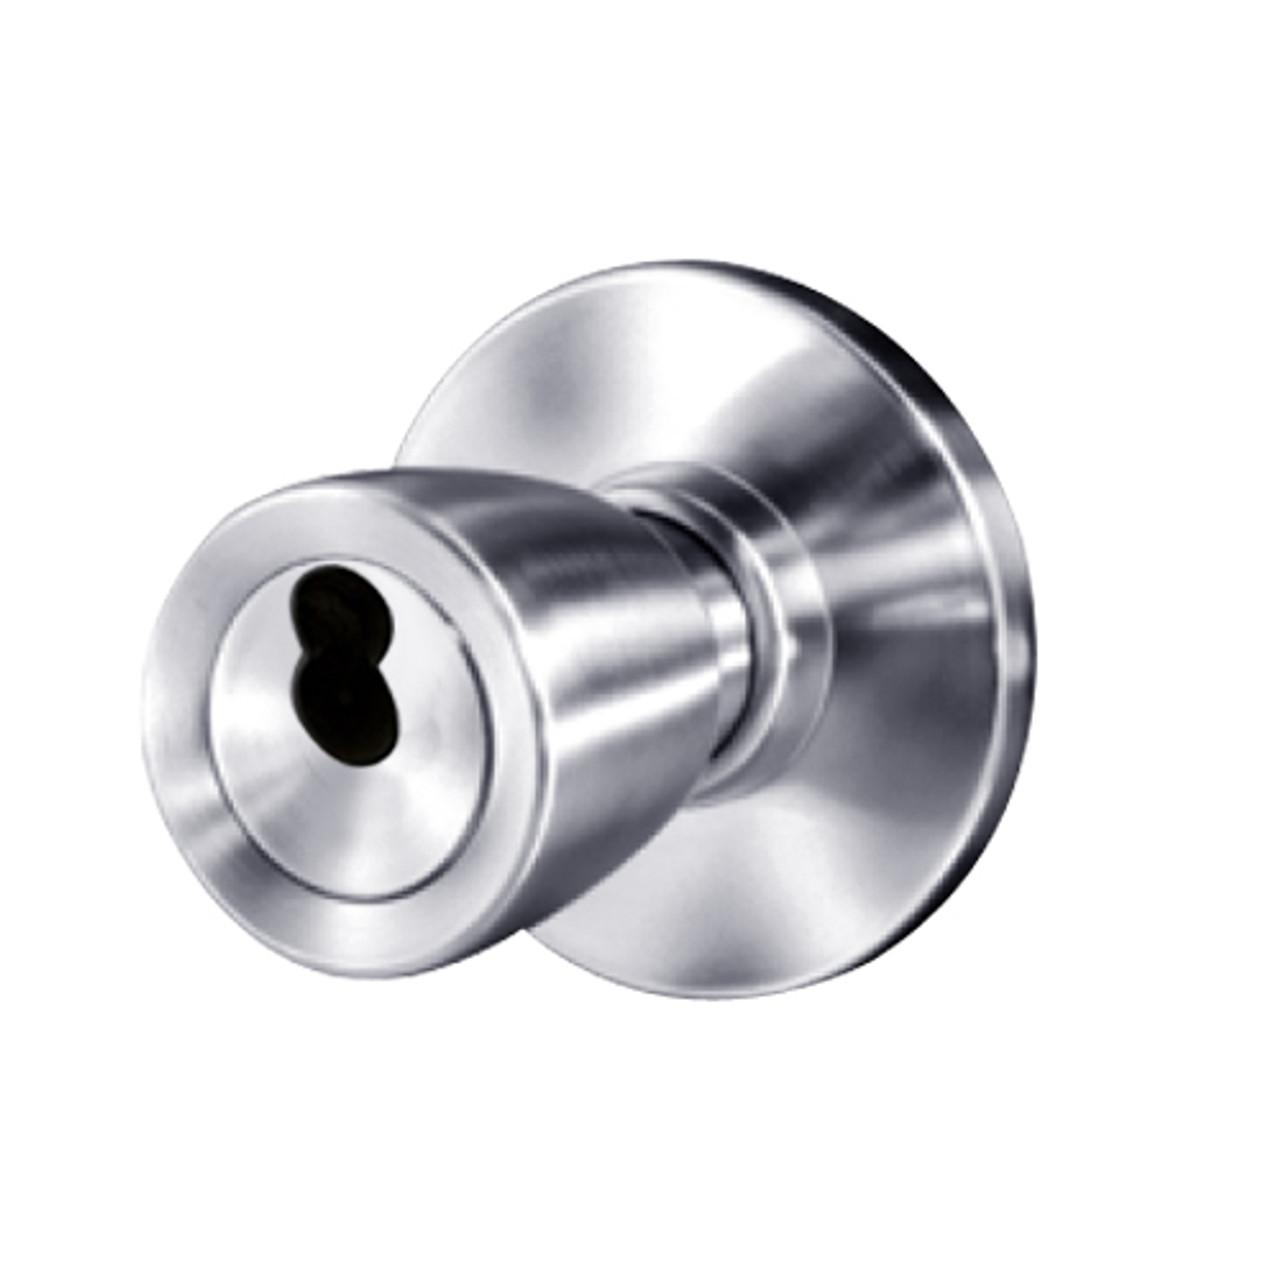 8K47YD6AS3626 Best 8K Series Exit Heavy Duty Cylindrical Knob Locks with Tulip Style in Satin Chrome